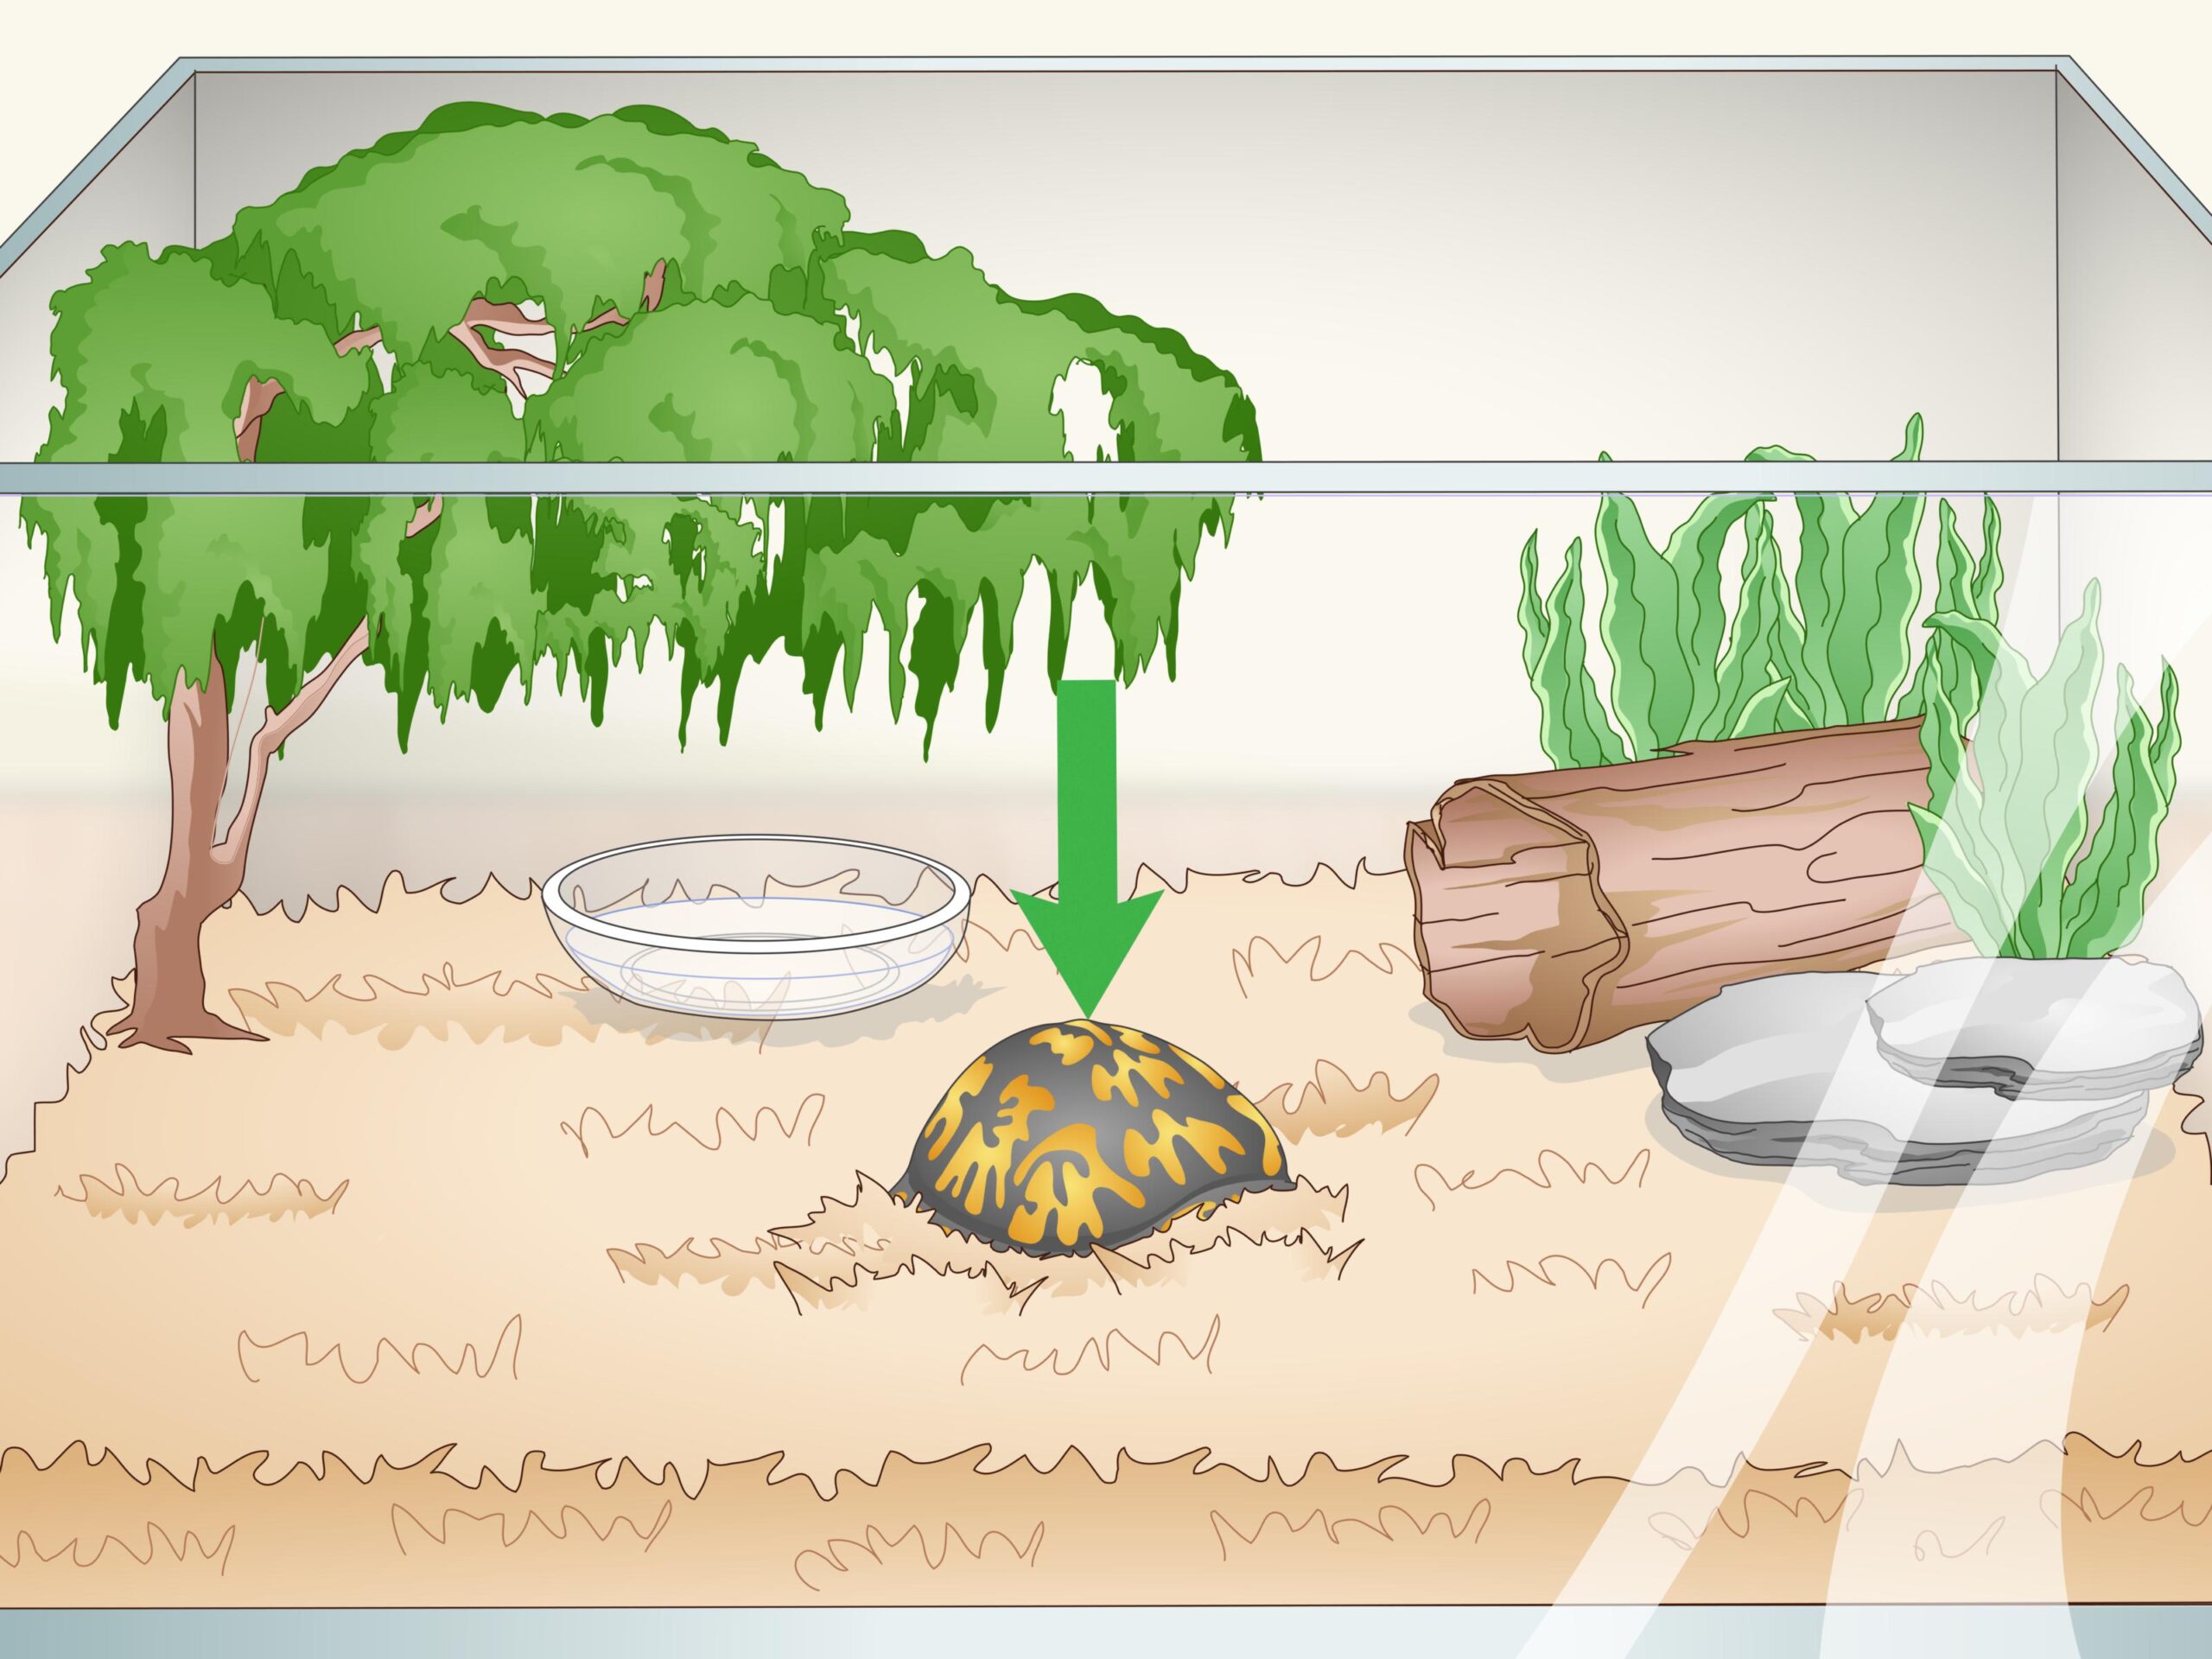 How to Care for Eastern Box Turtle?